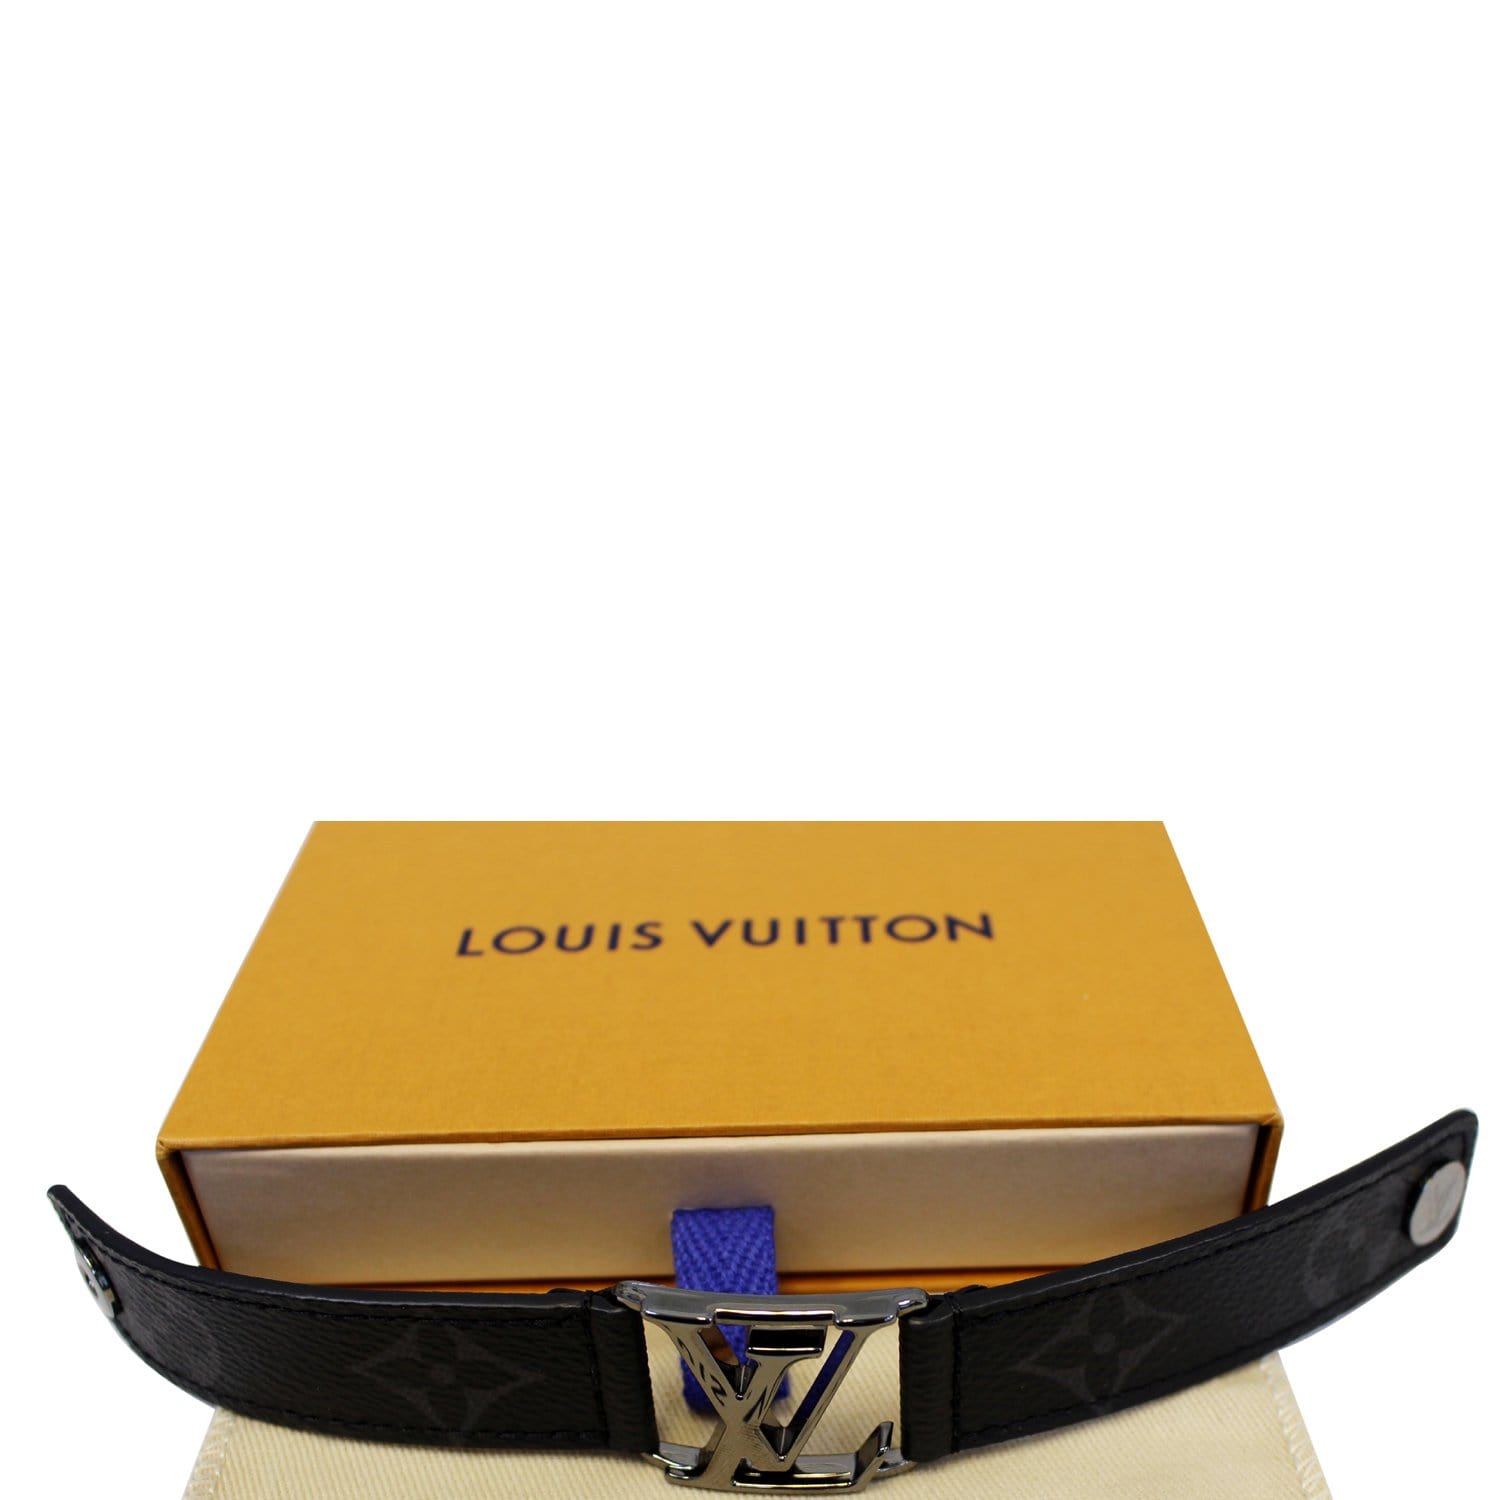 Buy [Used] LOUIS VUITTON Brass Hockenheim Bracelet Monogram Eclipse Leather  M6295 from Japan - Buy authentic Plus exclusive items from Japan